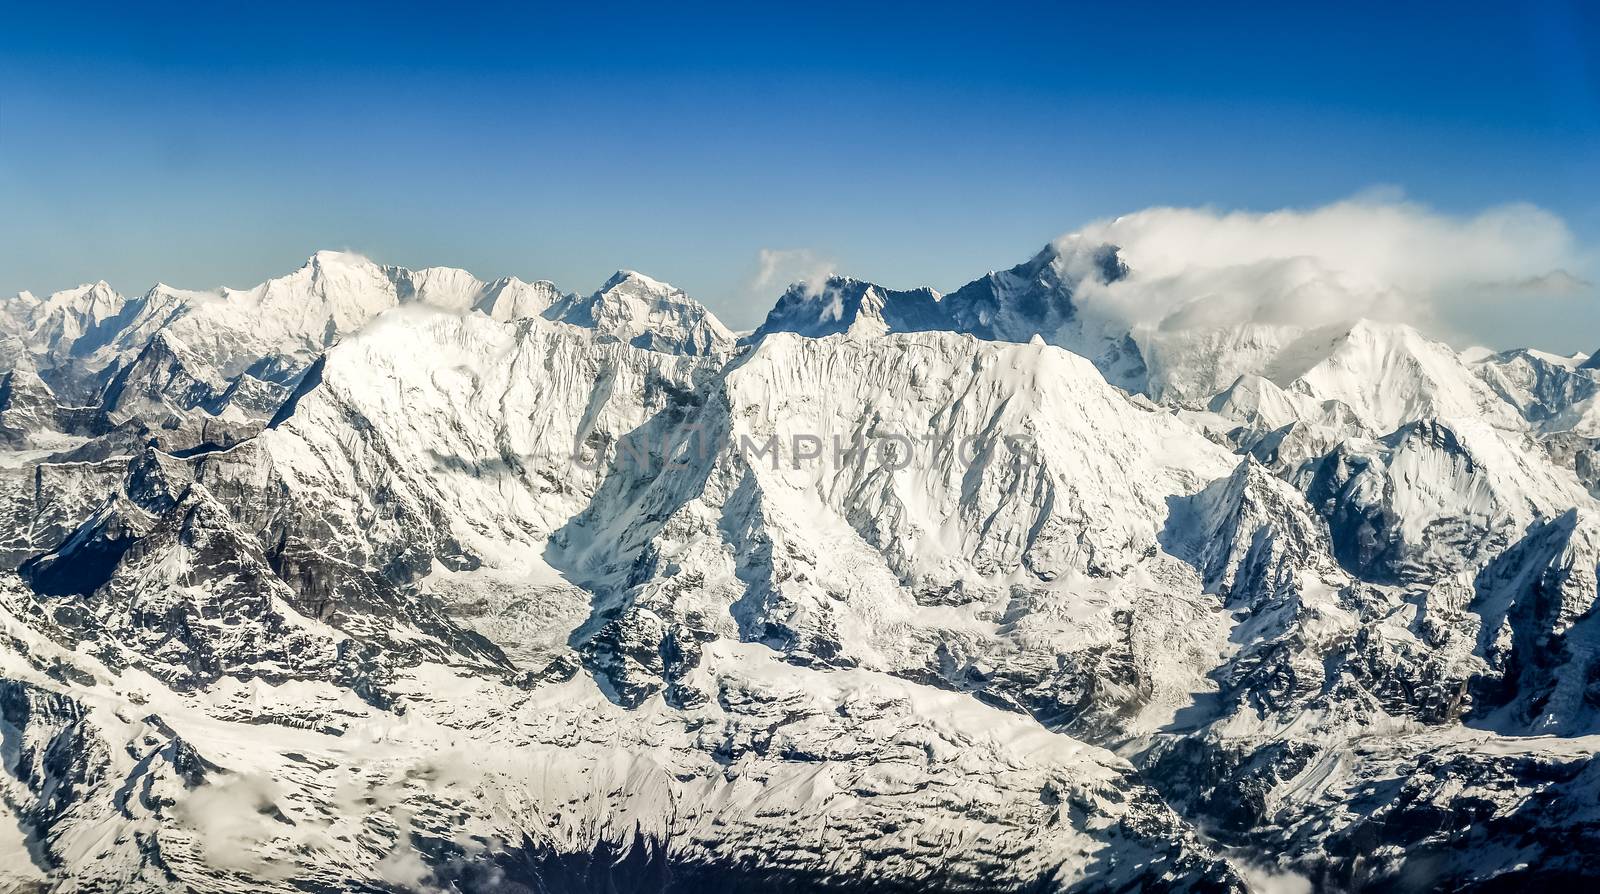 Himalayas mountains Everest range panorama aerial view with Mt. Everest, Nepal